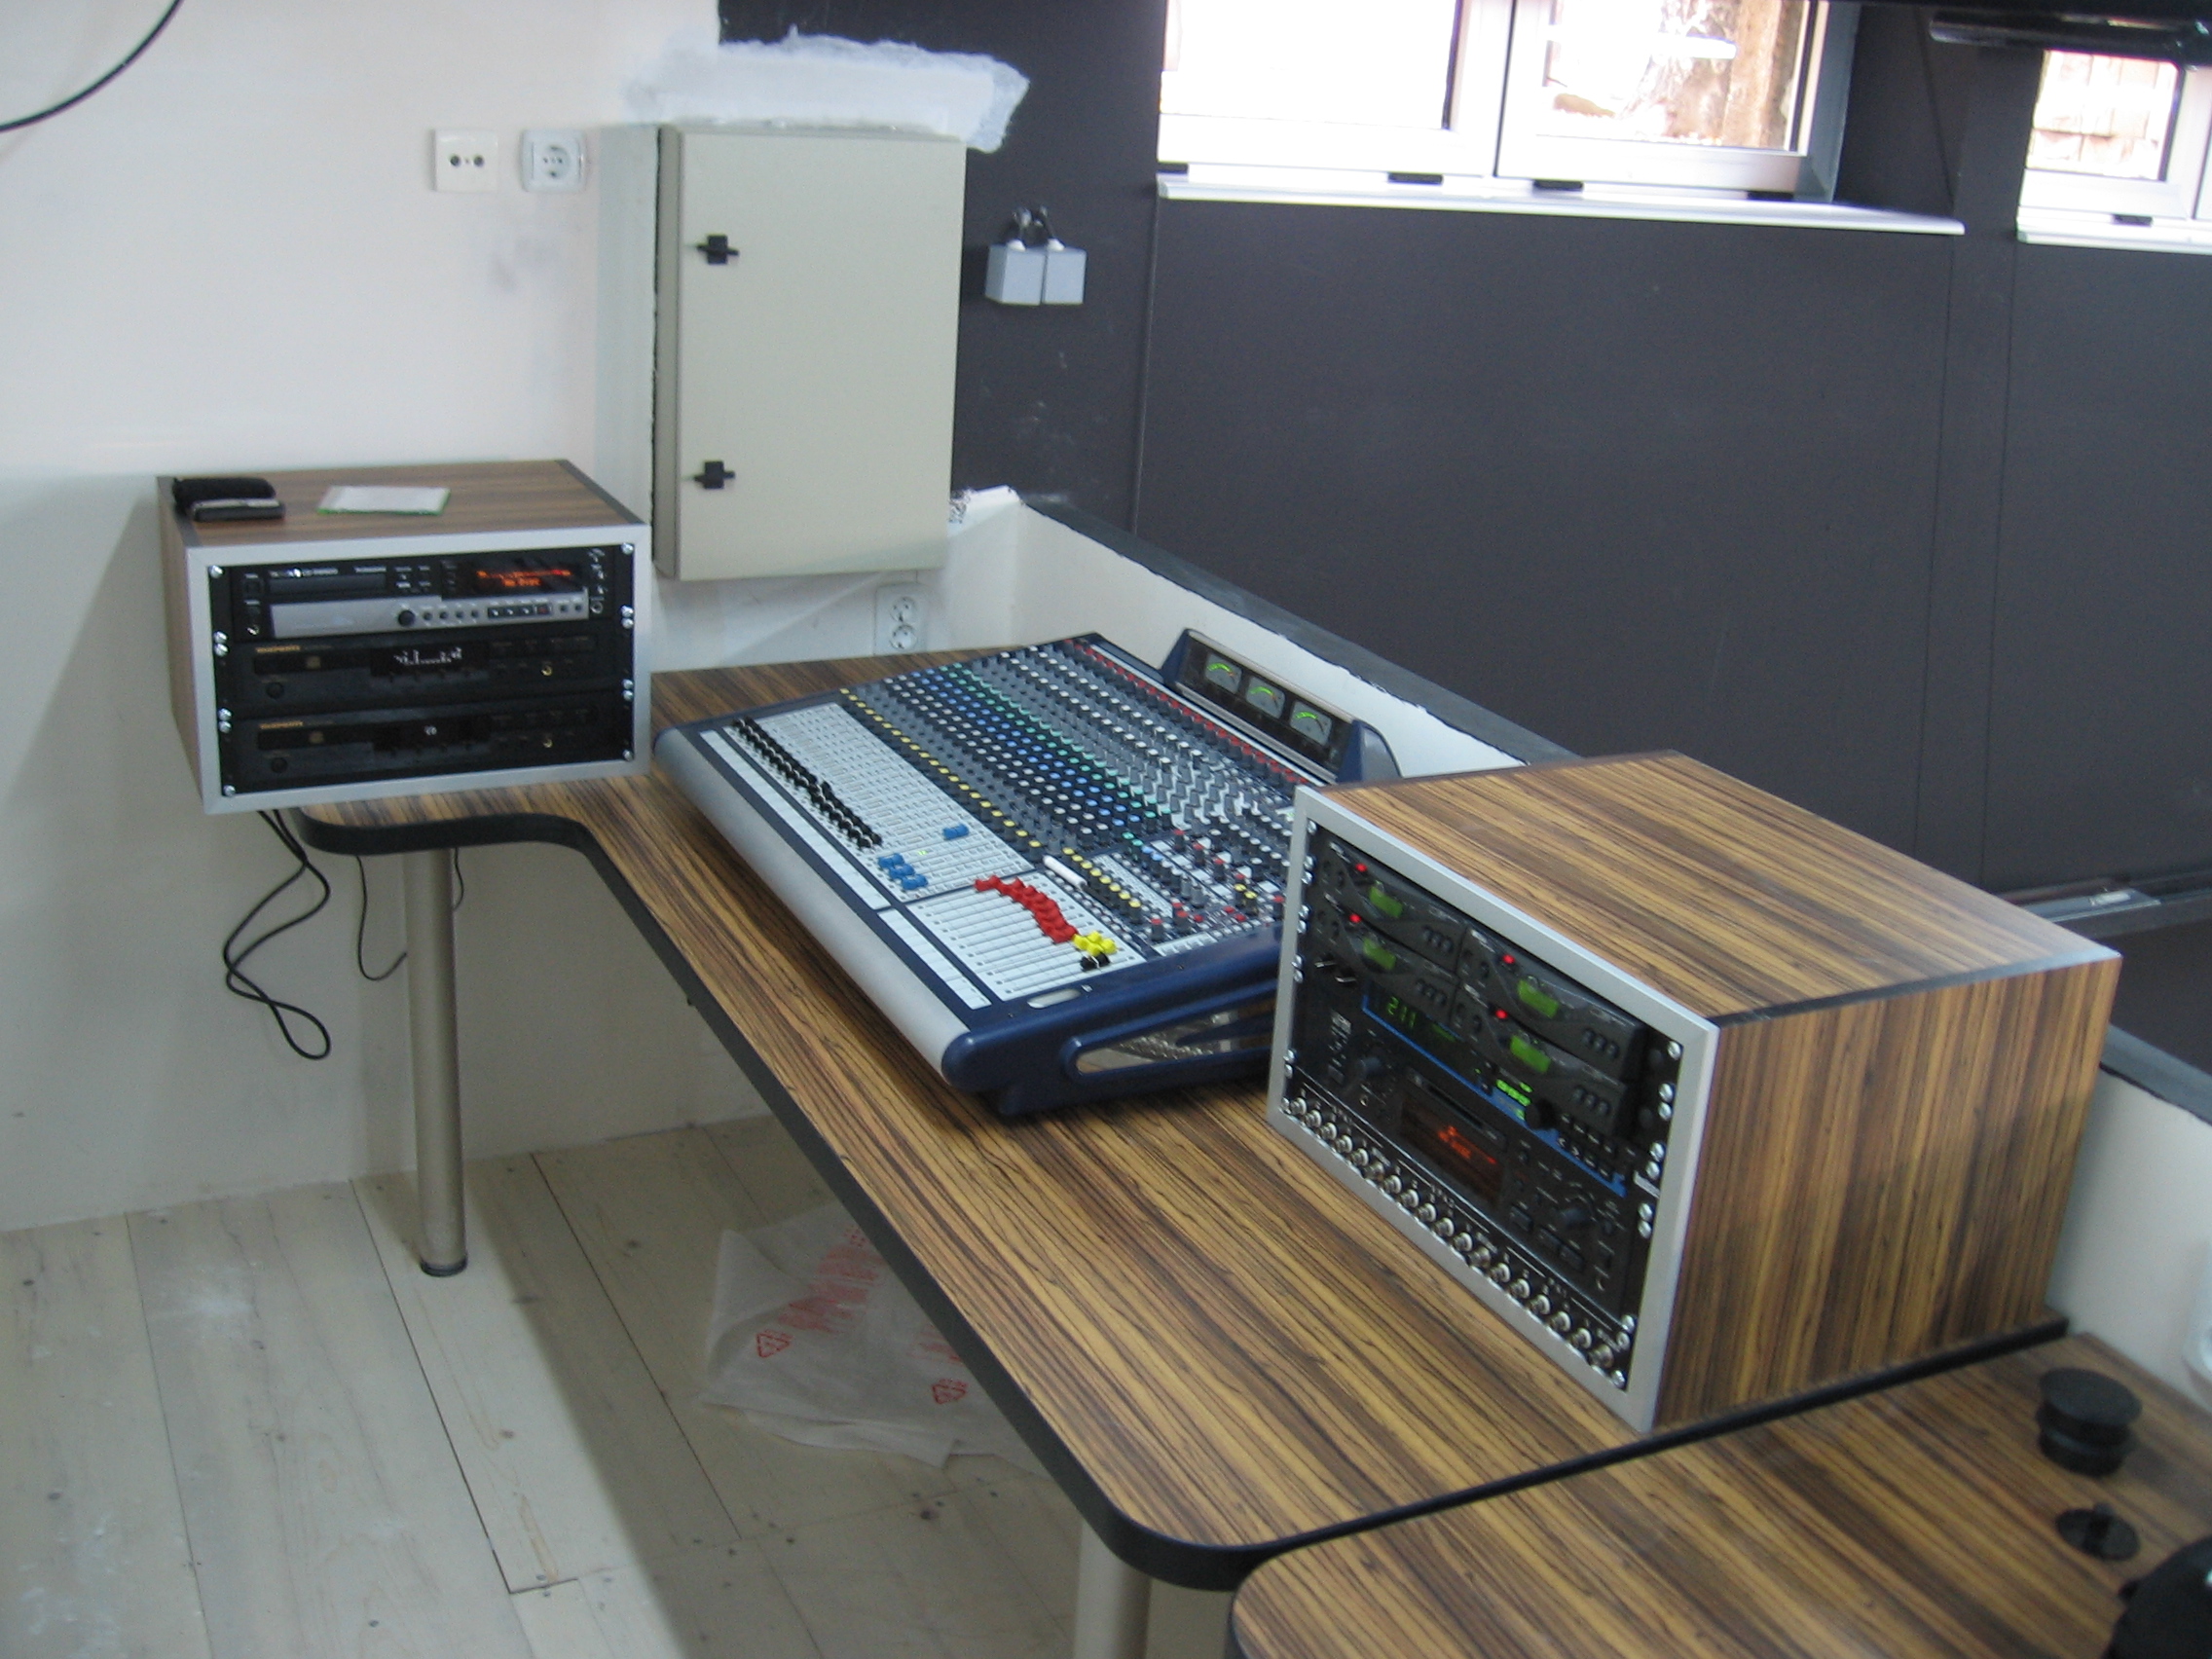 Instalation of equipment in control room